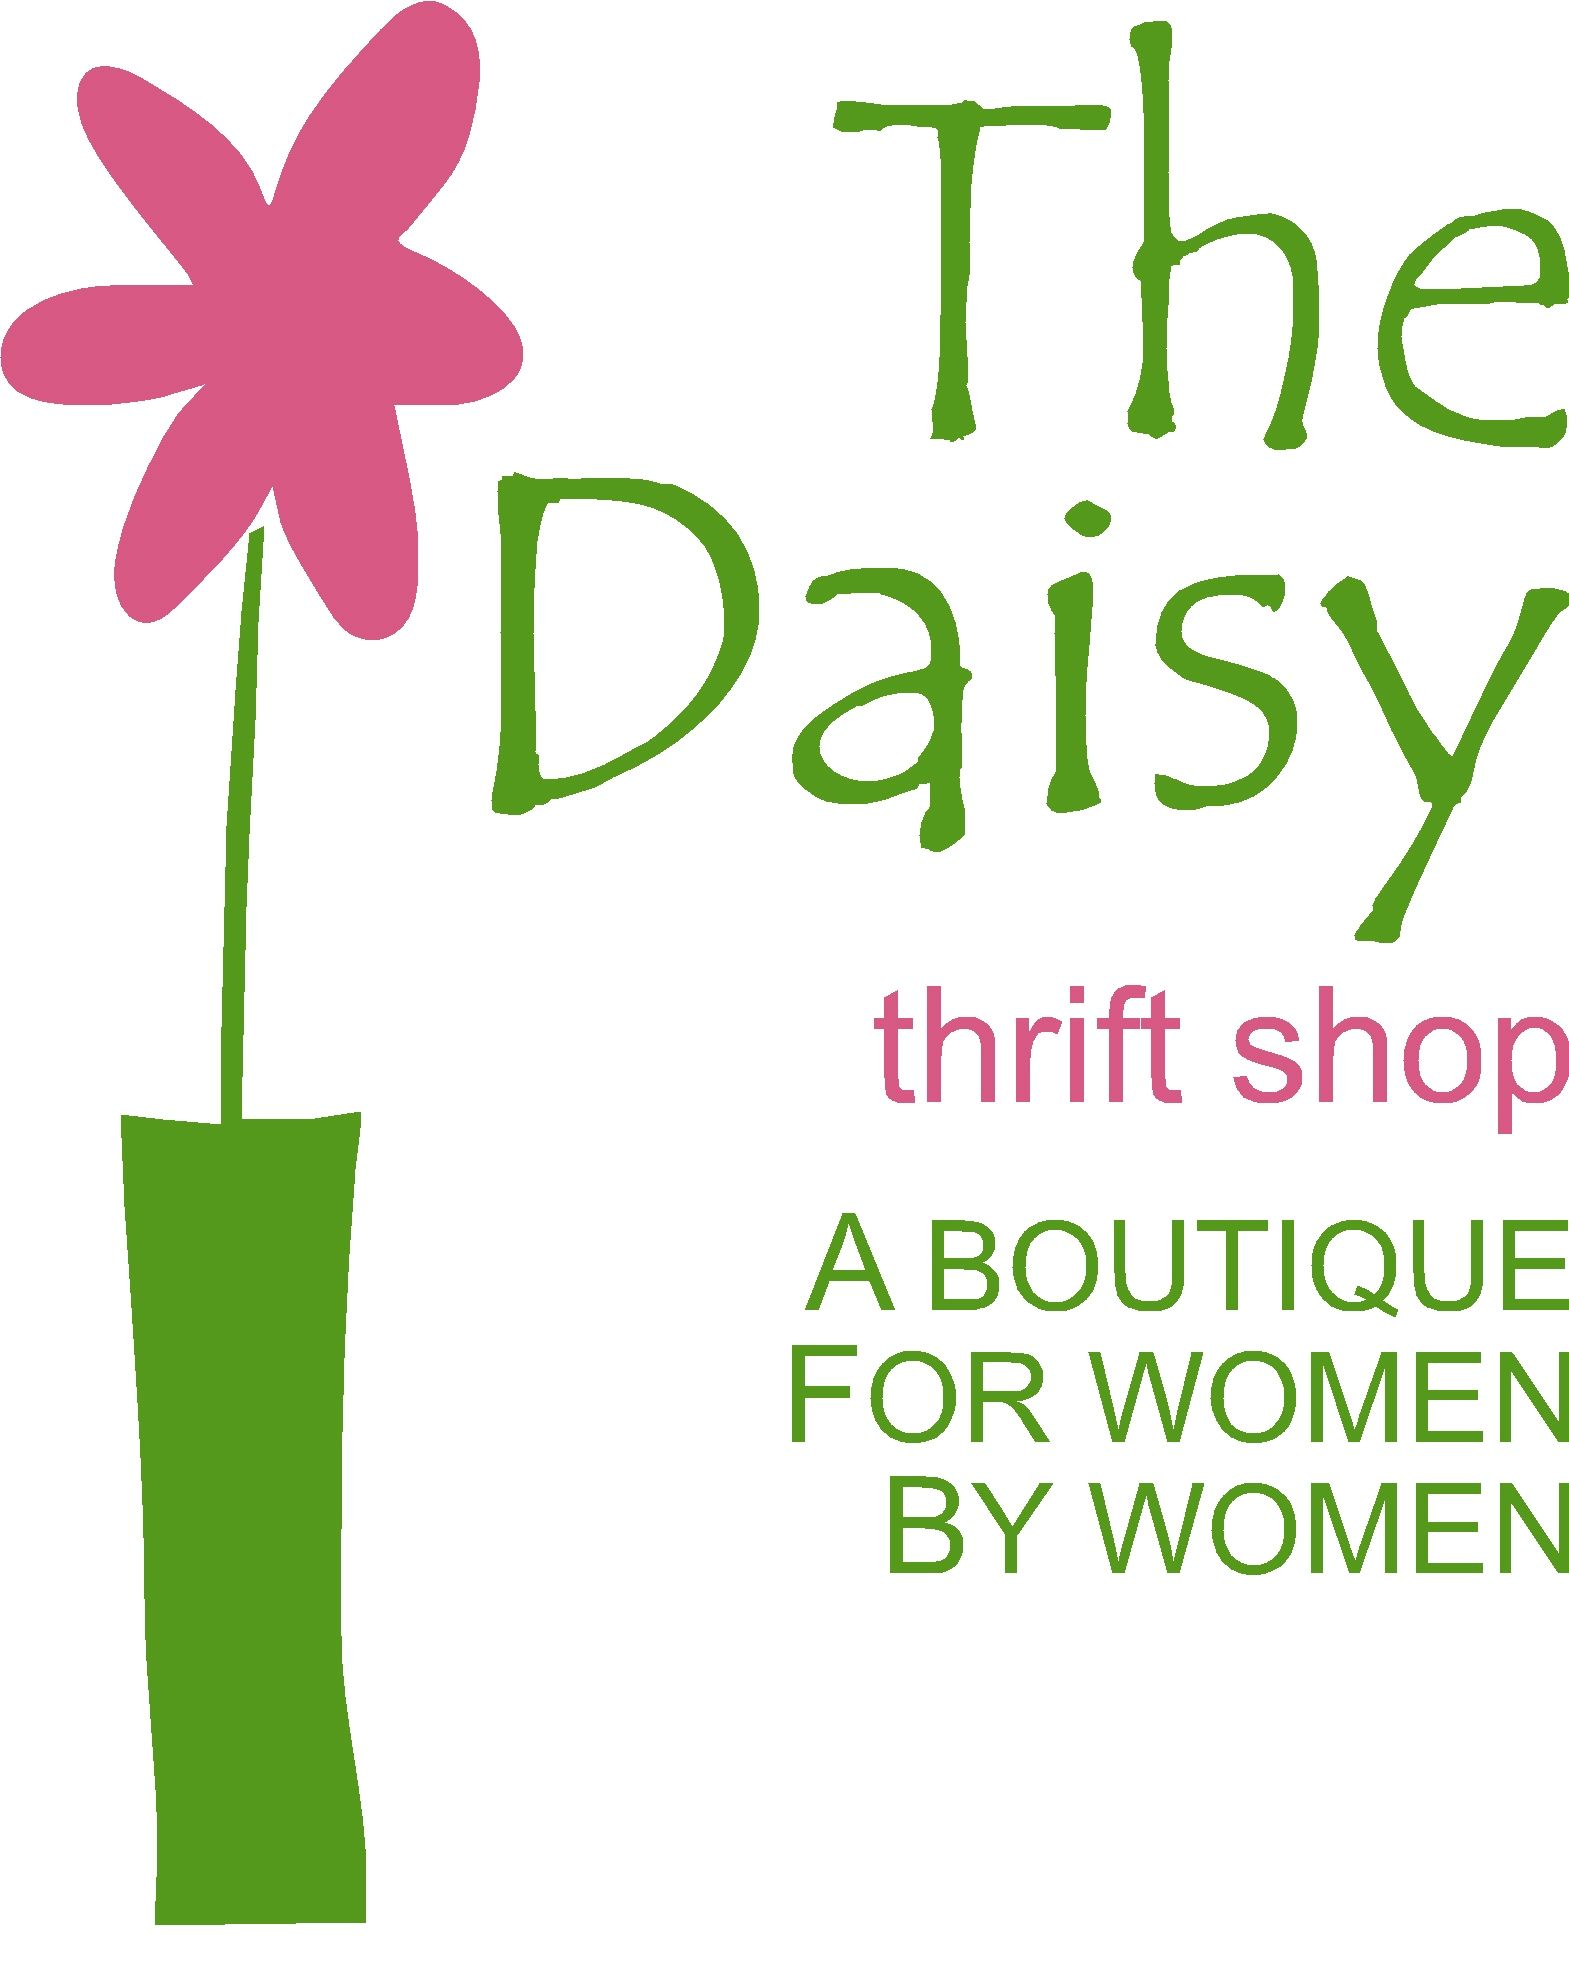 Fresh Start Celebrates 15 Years of The Daisy Thrift Shop in August